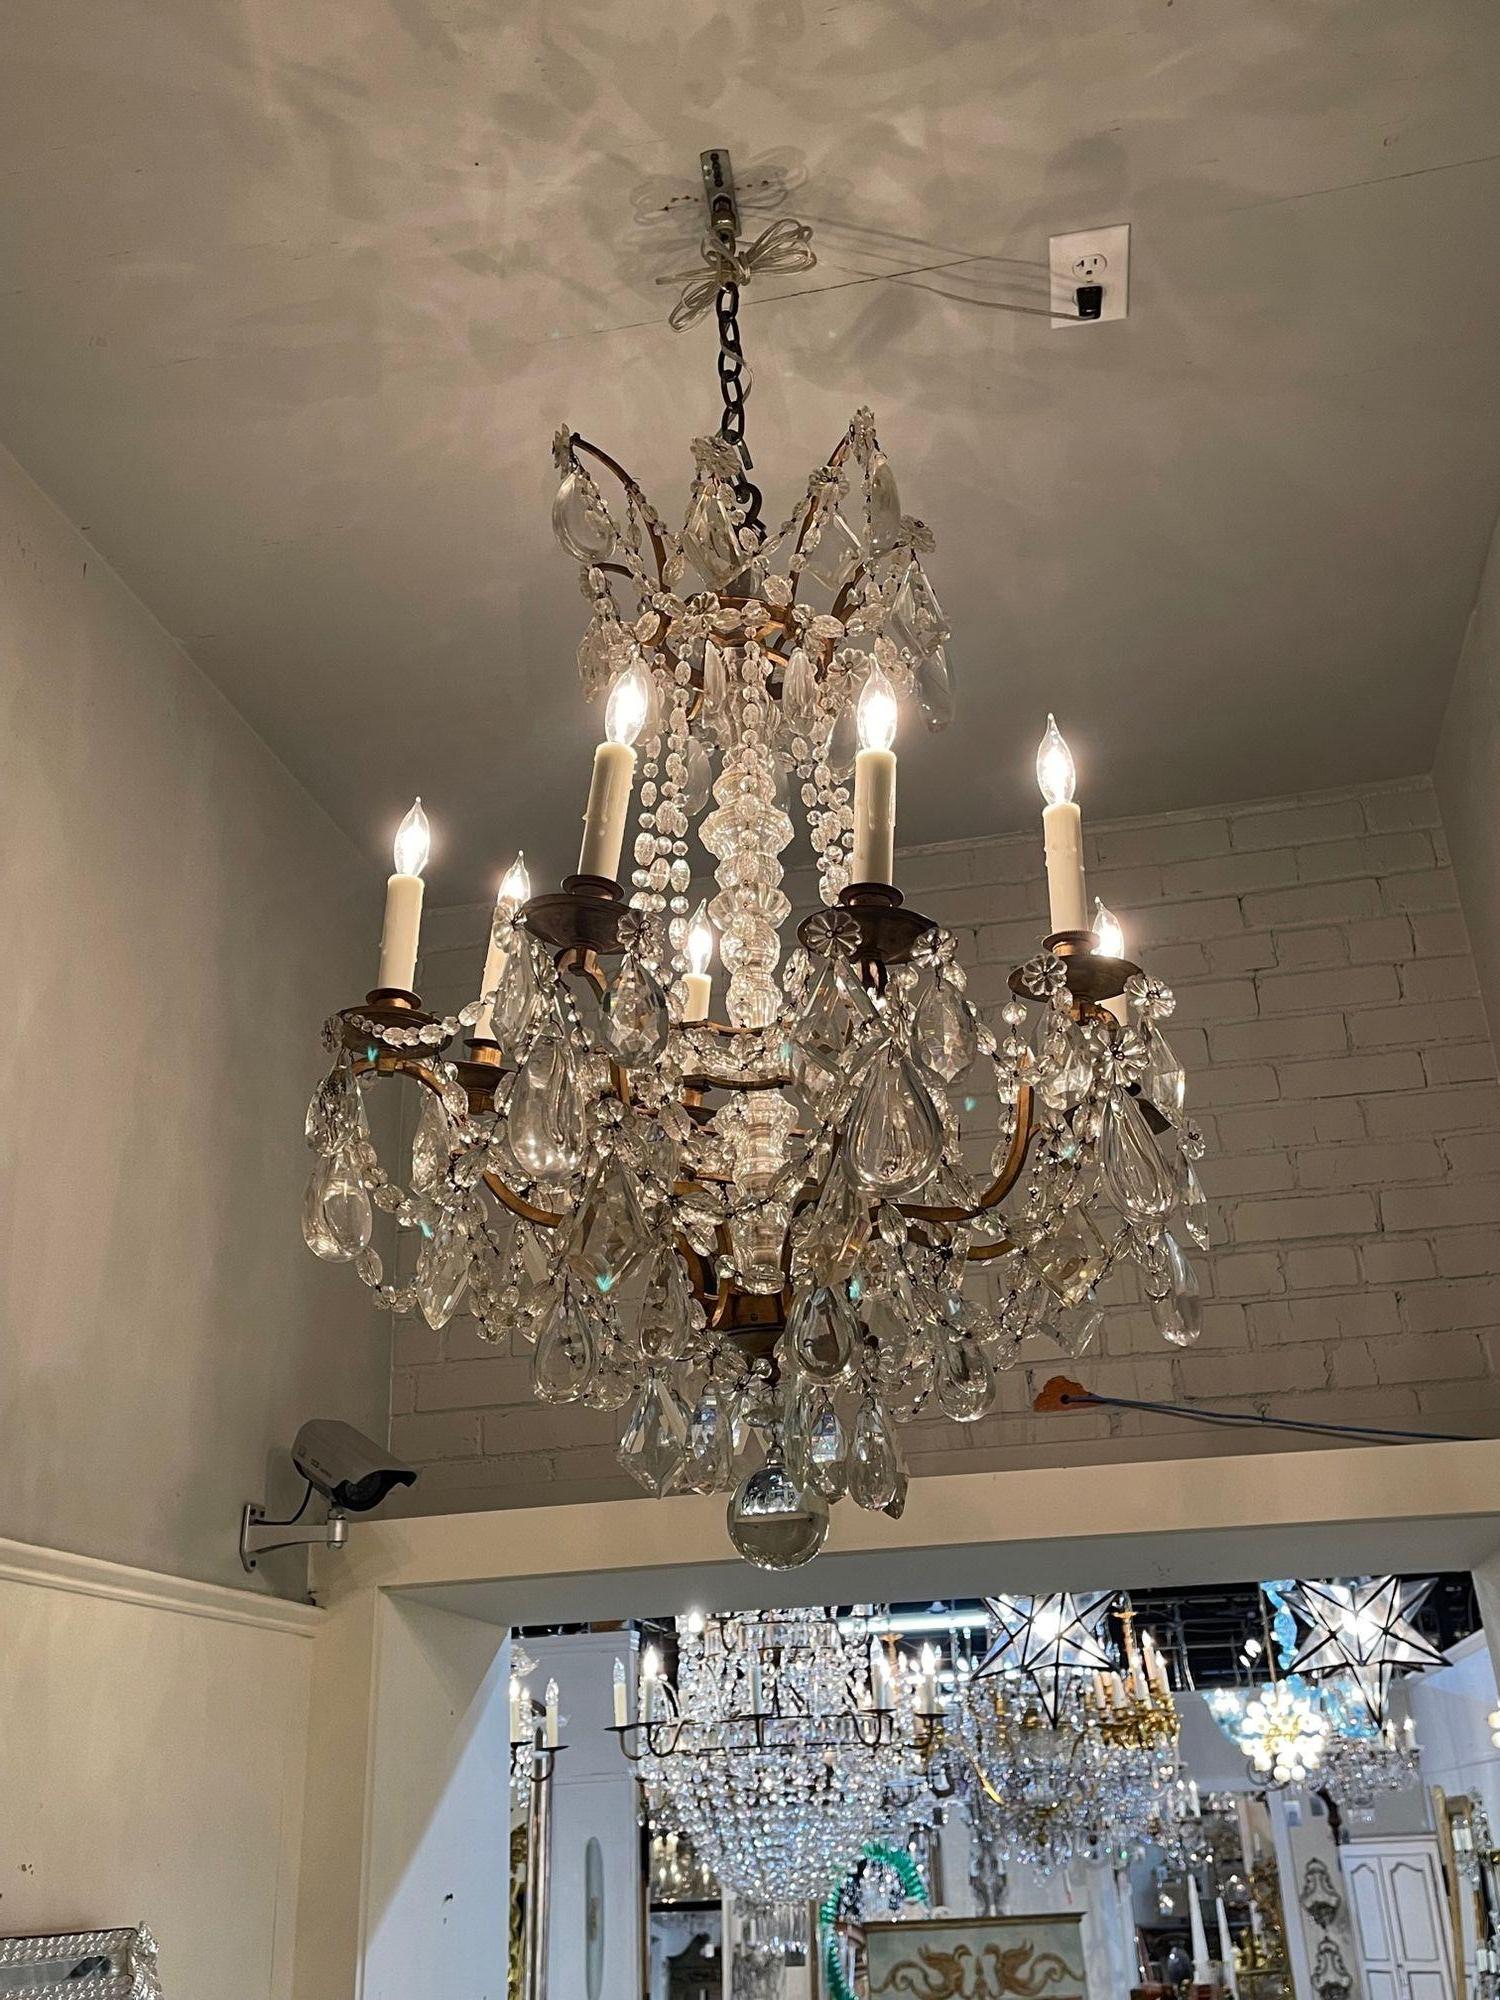 Elegant 19th century French Baccarat style gilt bronze and crystal chandelier with 8 lights. This fixture is covered in beautiful crystals and has a very fine bronze base. A lovely quality piece!